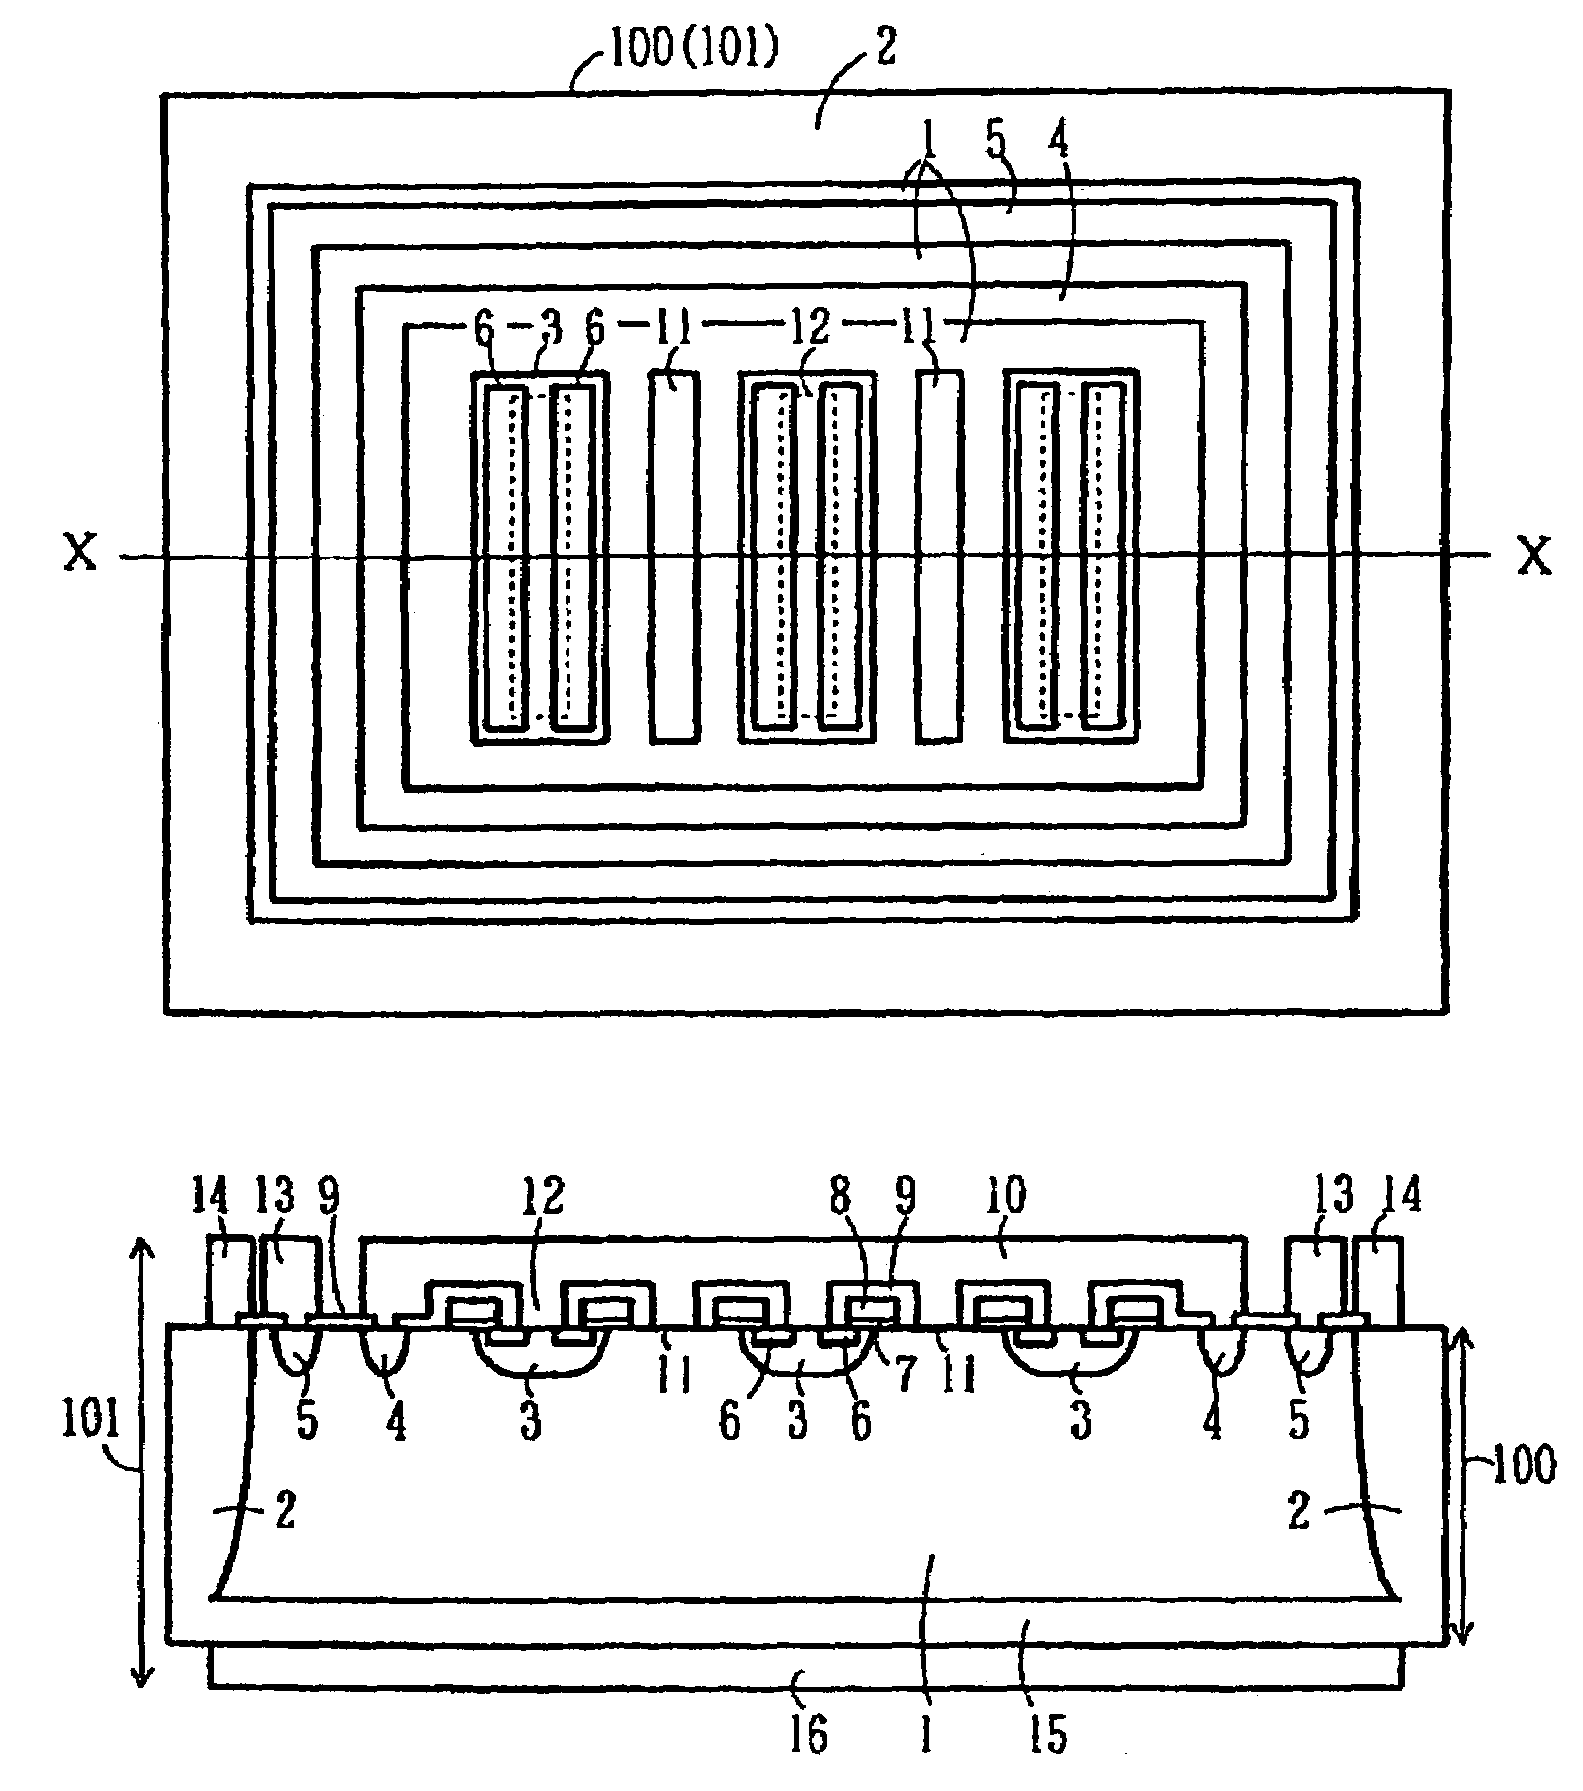 Semiconductor device, the method of manufacturing the same, and two-way switching device using the semiconductor devices